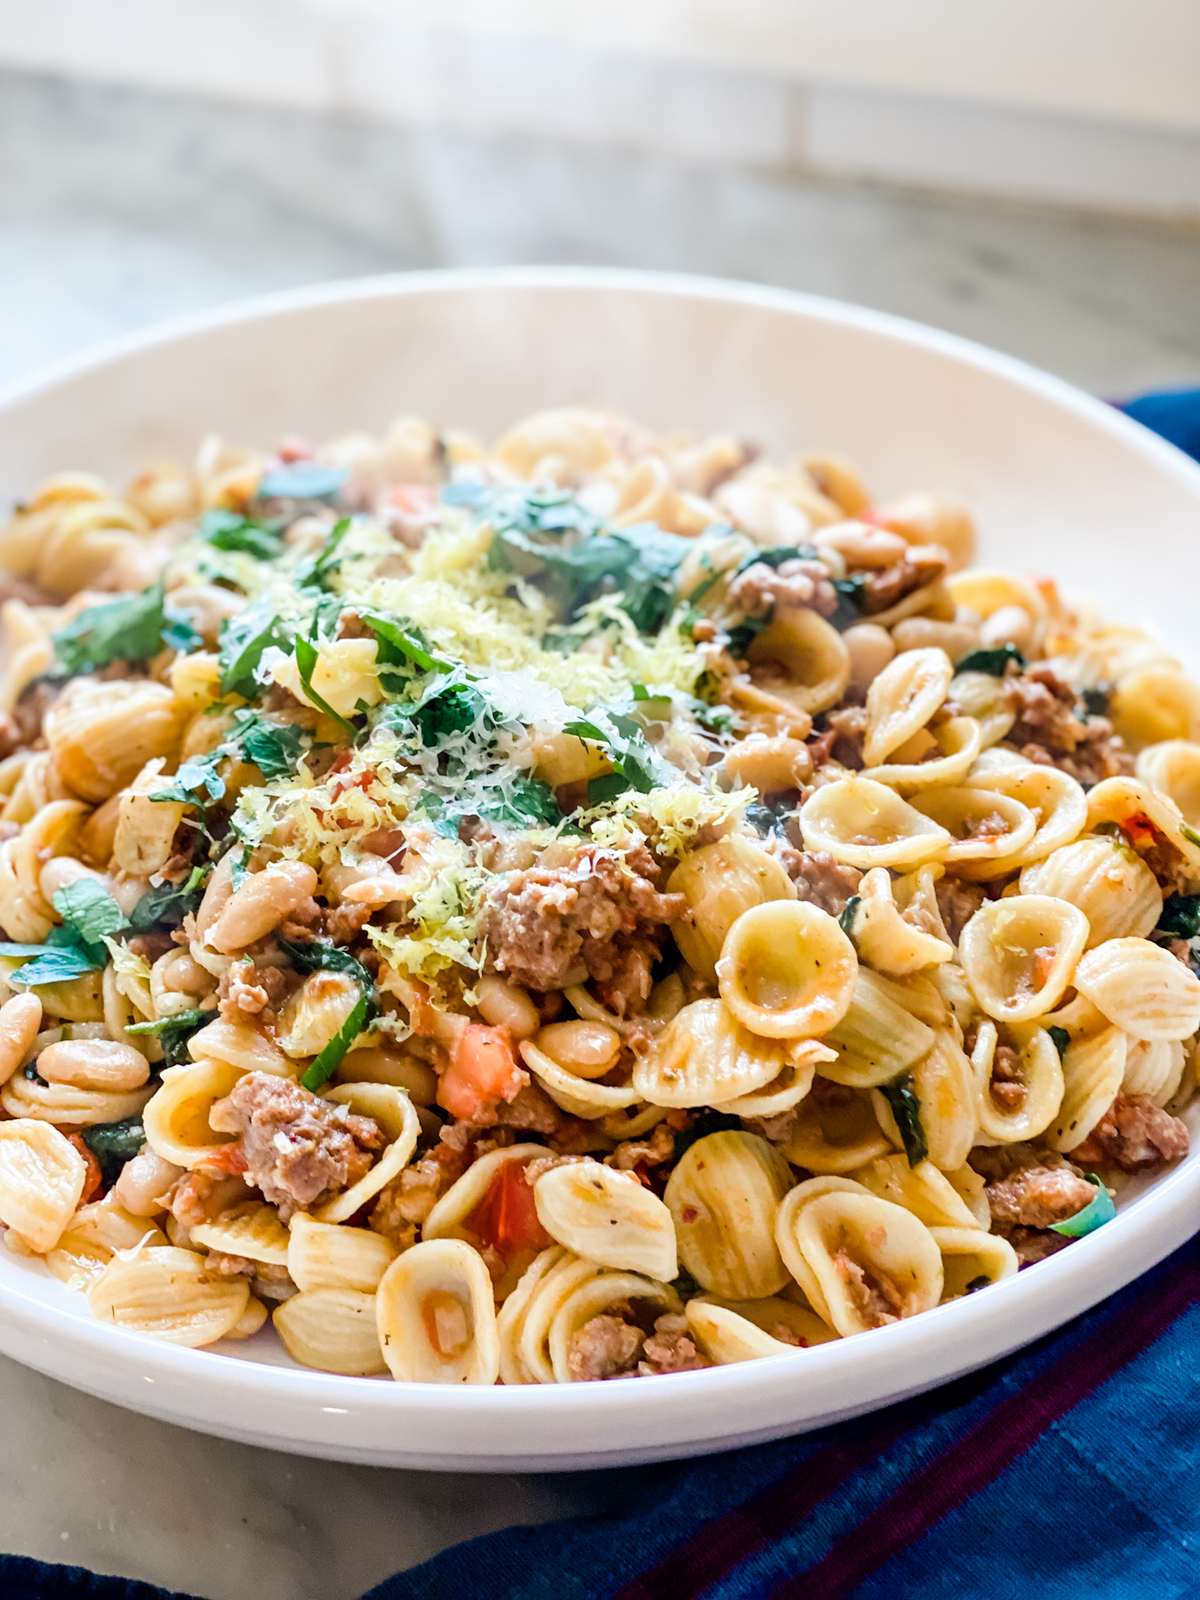 Annie's Pasta With Sausage, Beans, and Greens